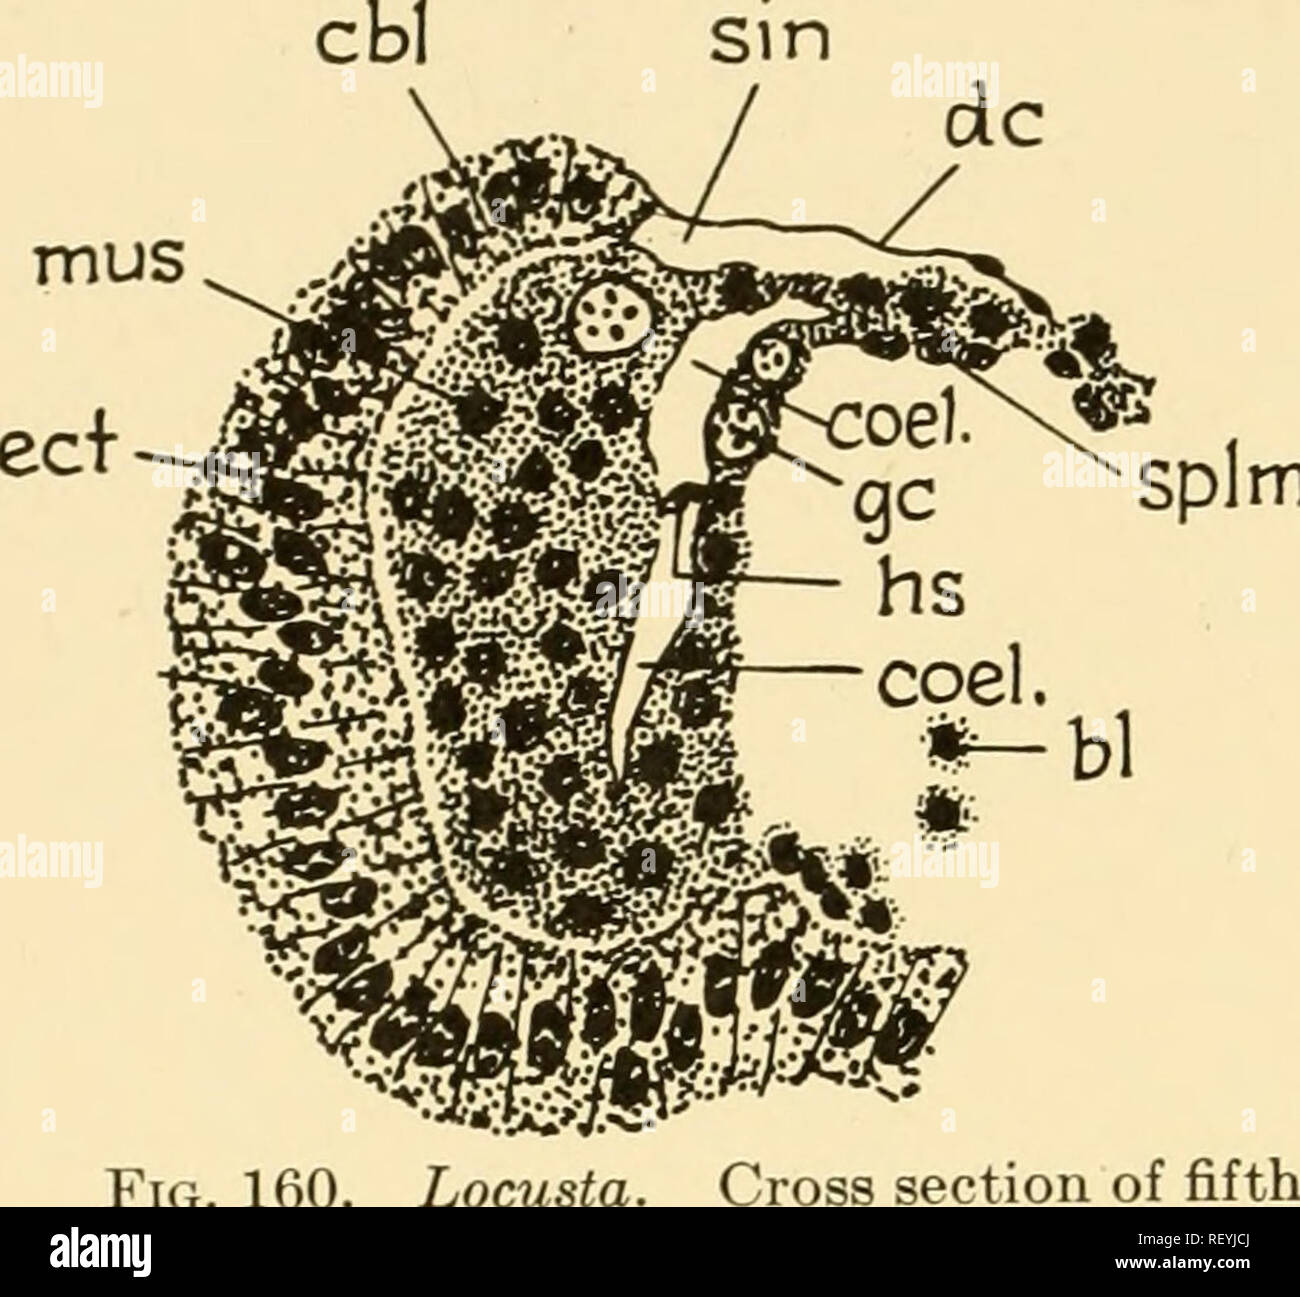 . Embryology of insects and myriapods; the developmental history of insects, centipedes, and millepedes from egg desposition [!] to hatching. Embryology -- Insects; Embryology -- Myriapoda. 238 EMBRYOLOGY OF INSECTS AND MYRIAPODS splm. a pair of deep medially directed invaginations arises just behind the mandi- bles which fuse with the T-shaped invaginations to form the tentorium. The dorsal tentorial arms arise afterward as outgrowths from the anterior tentorial arms. The mandibular apodemes arise at the 90-hour stage as a pair of deep invagina- tions near the middle of the inner side of the  Stock Photo